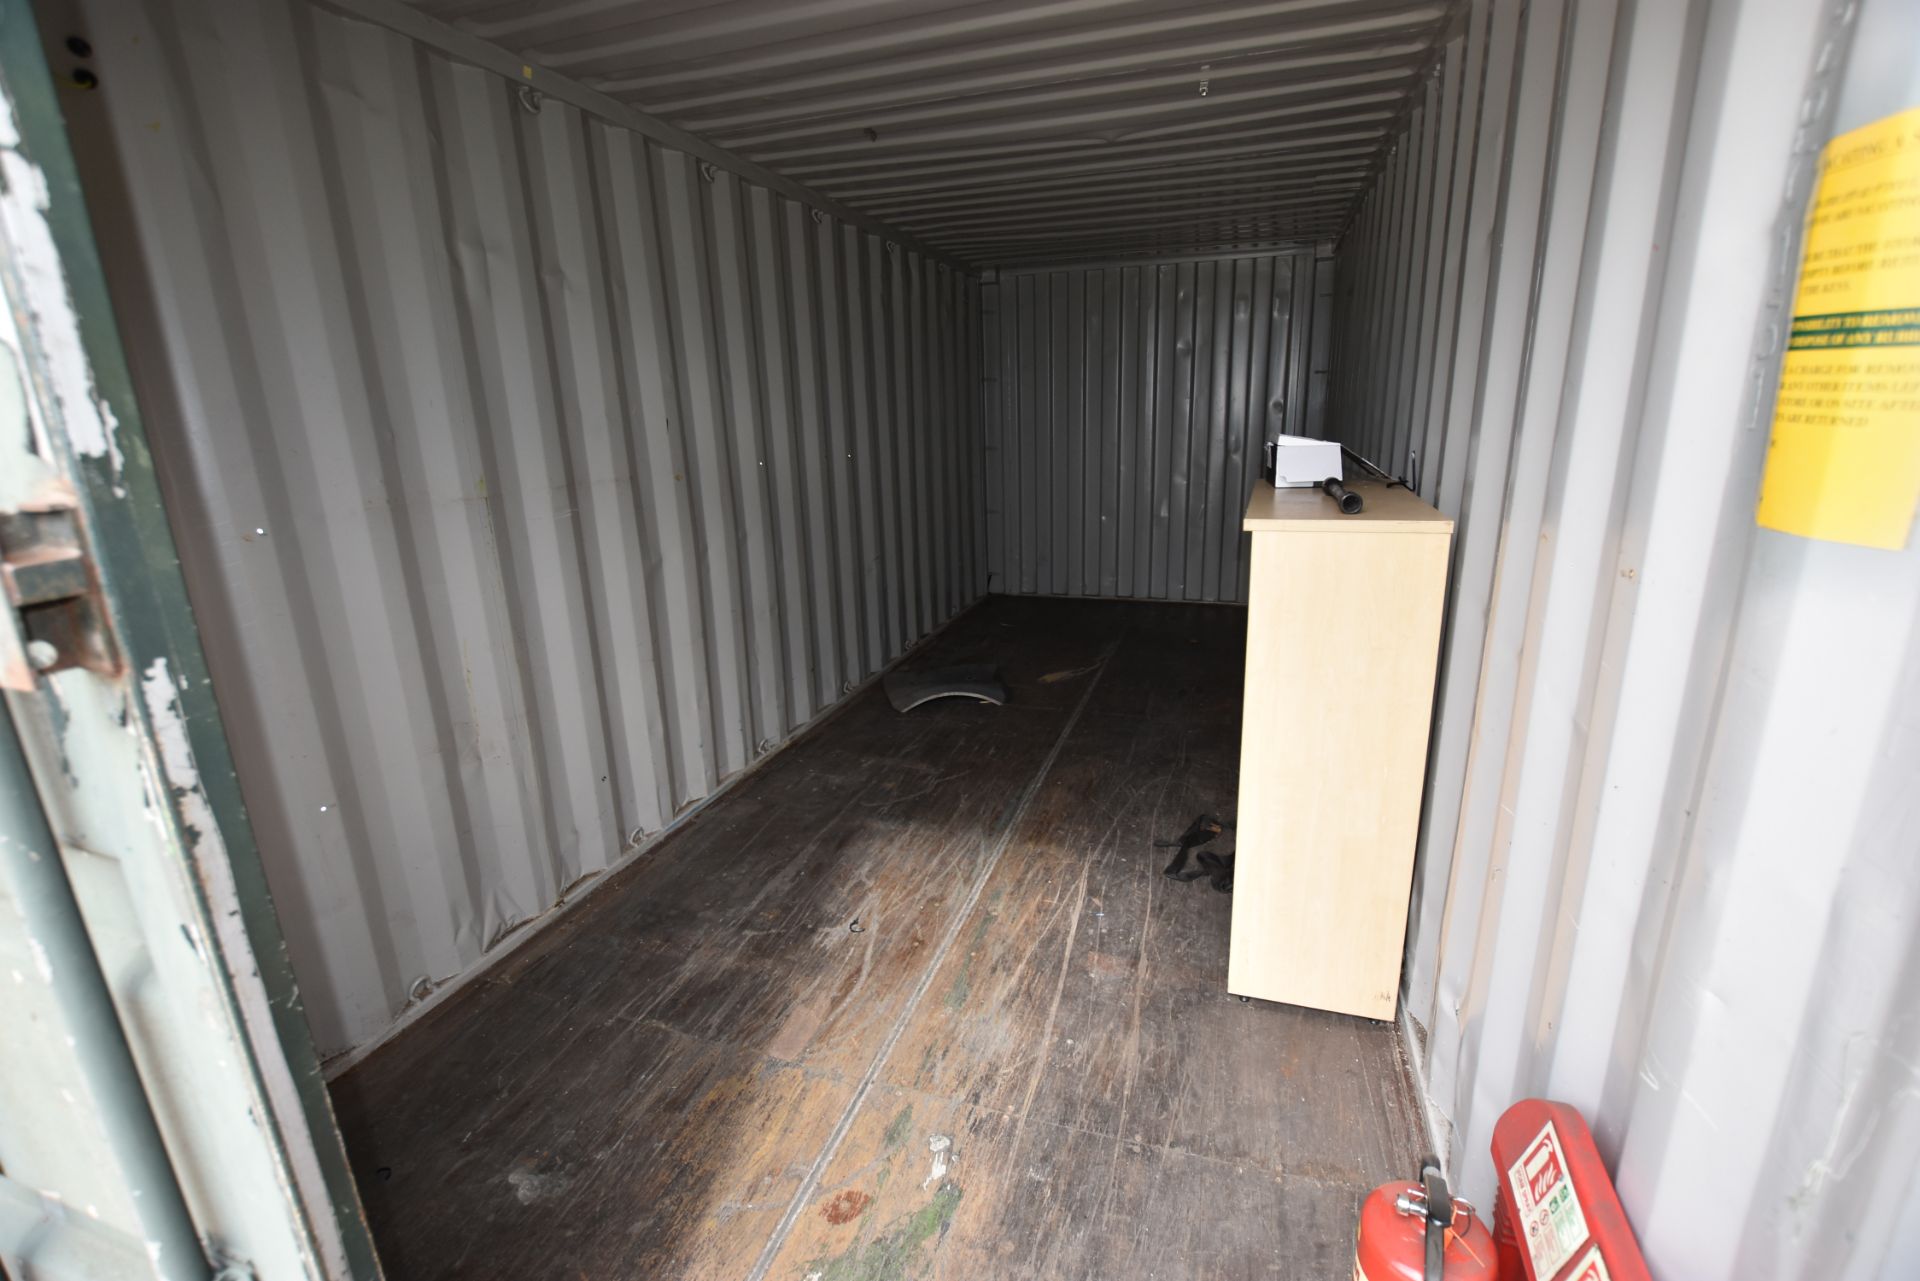 20ft Steel Shipping Container (Please Note Risk As - Image 3 of 3